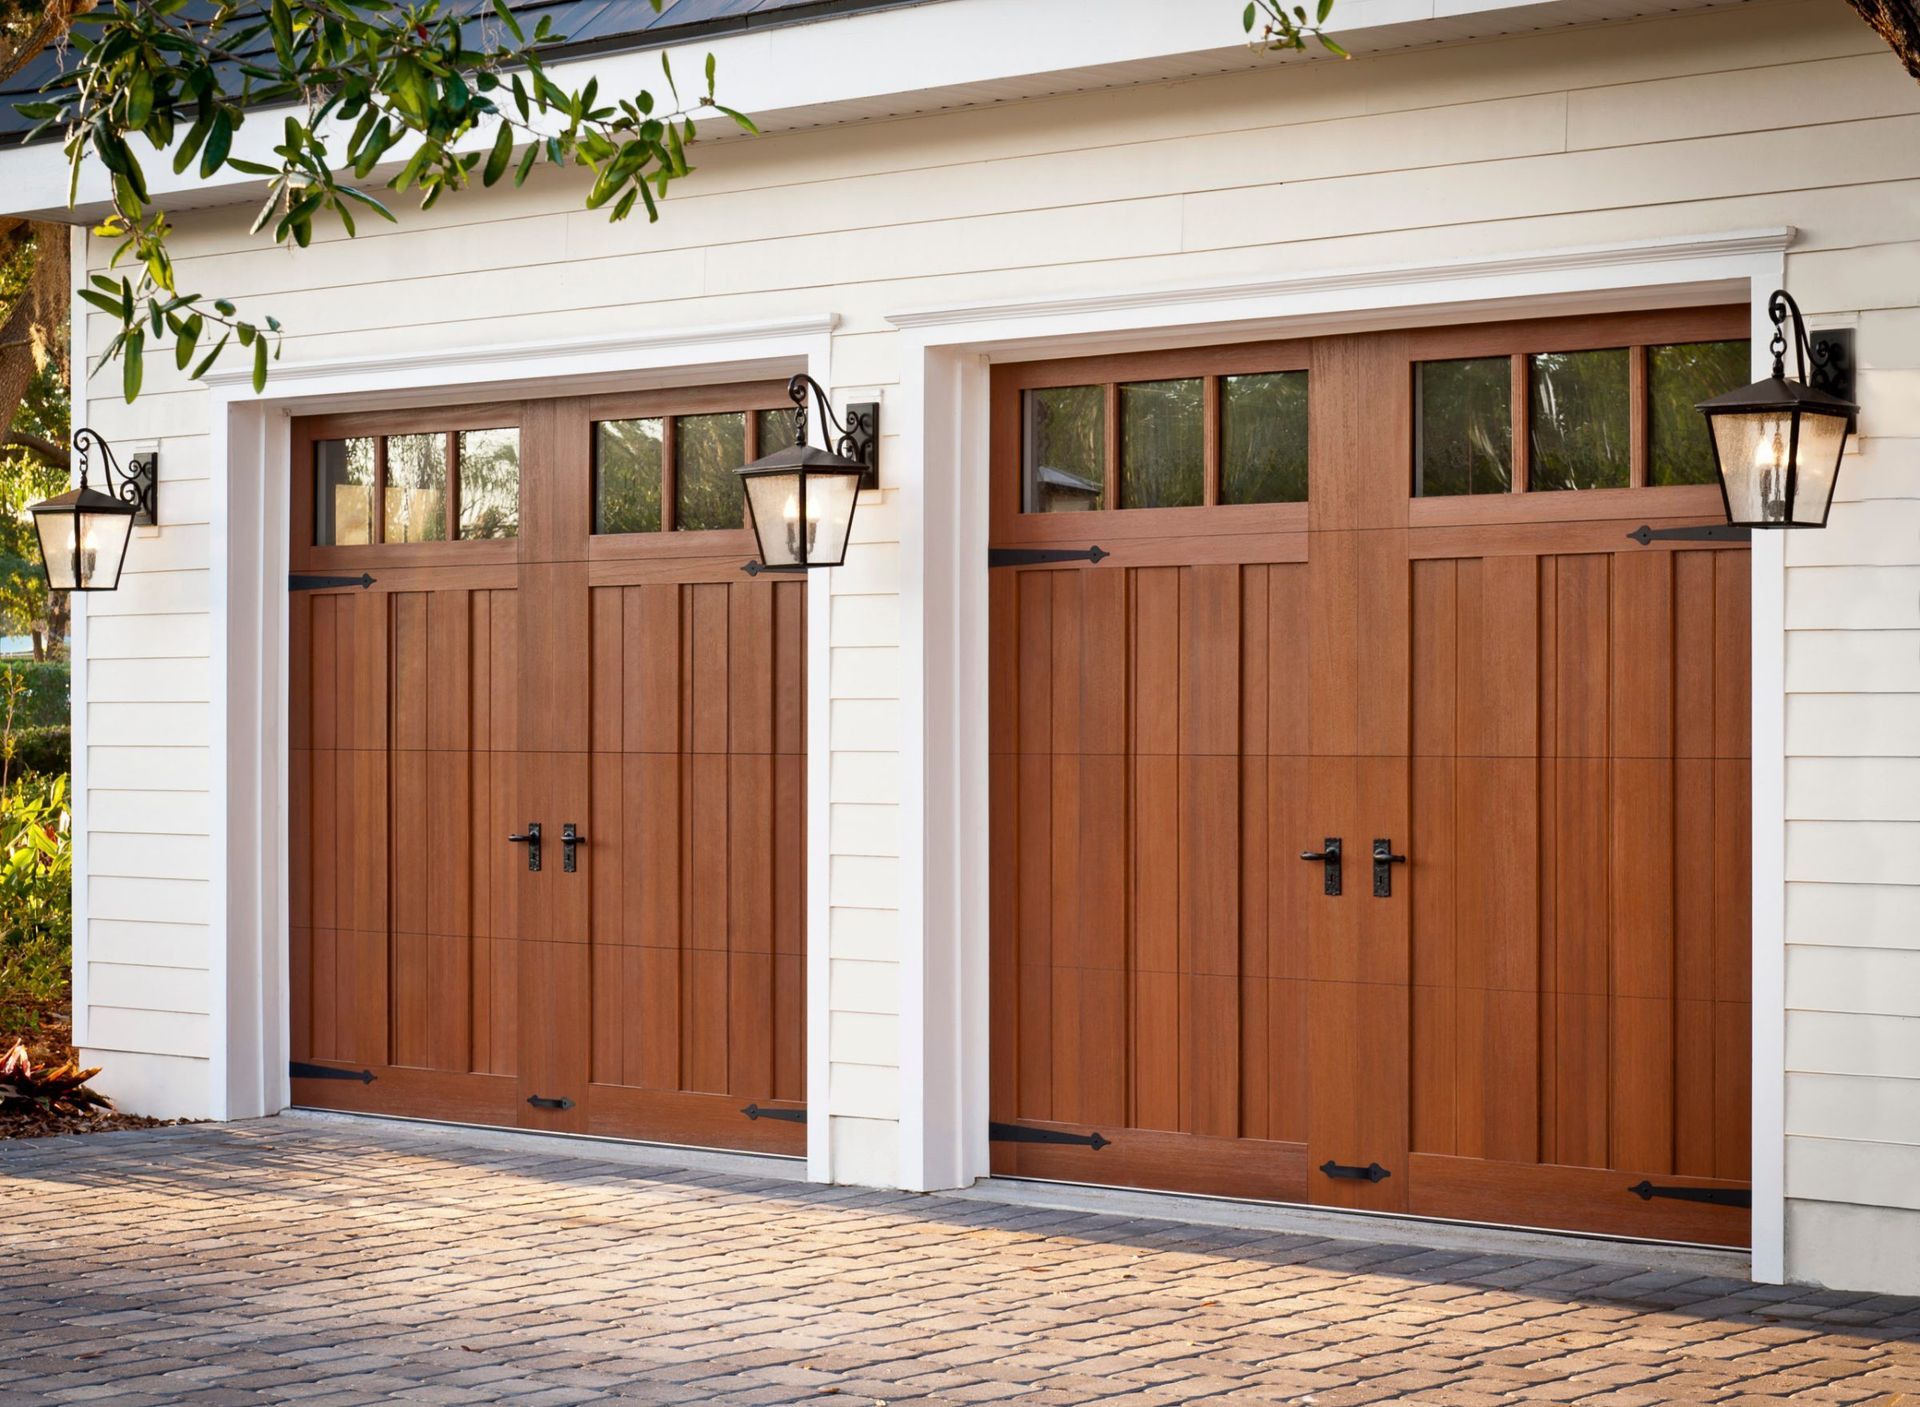 a pair of wooden garage doors on a white house .